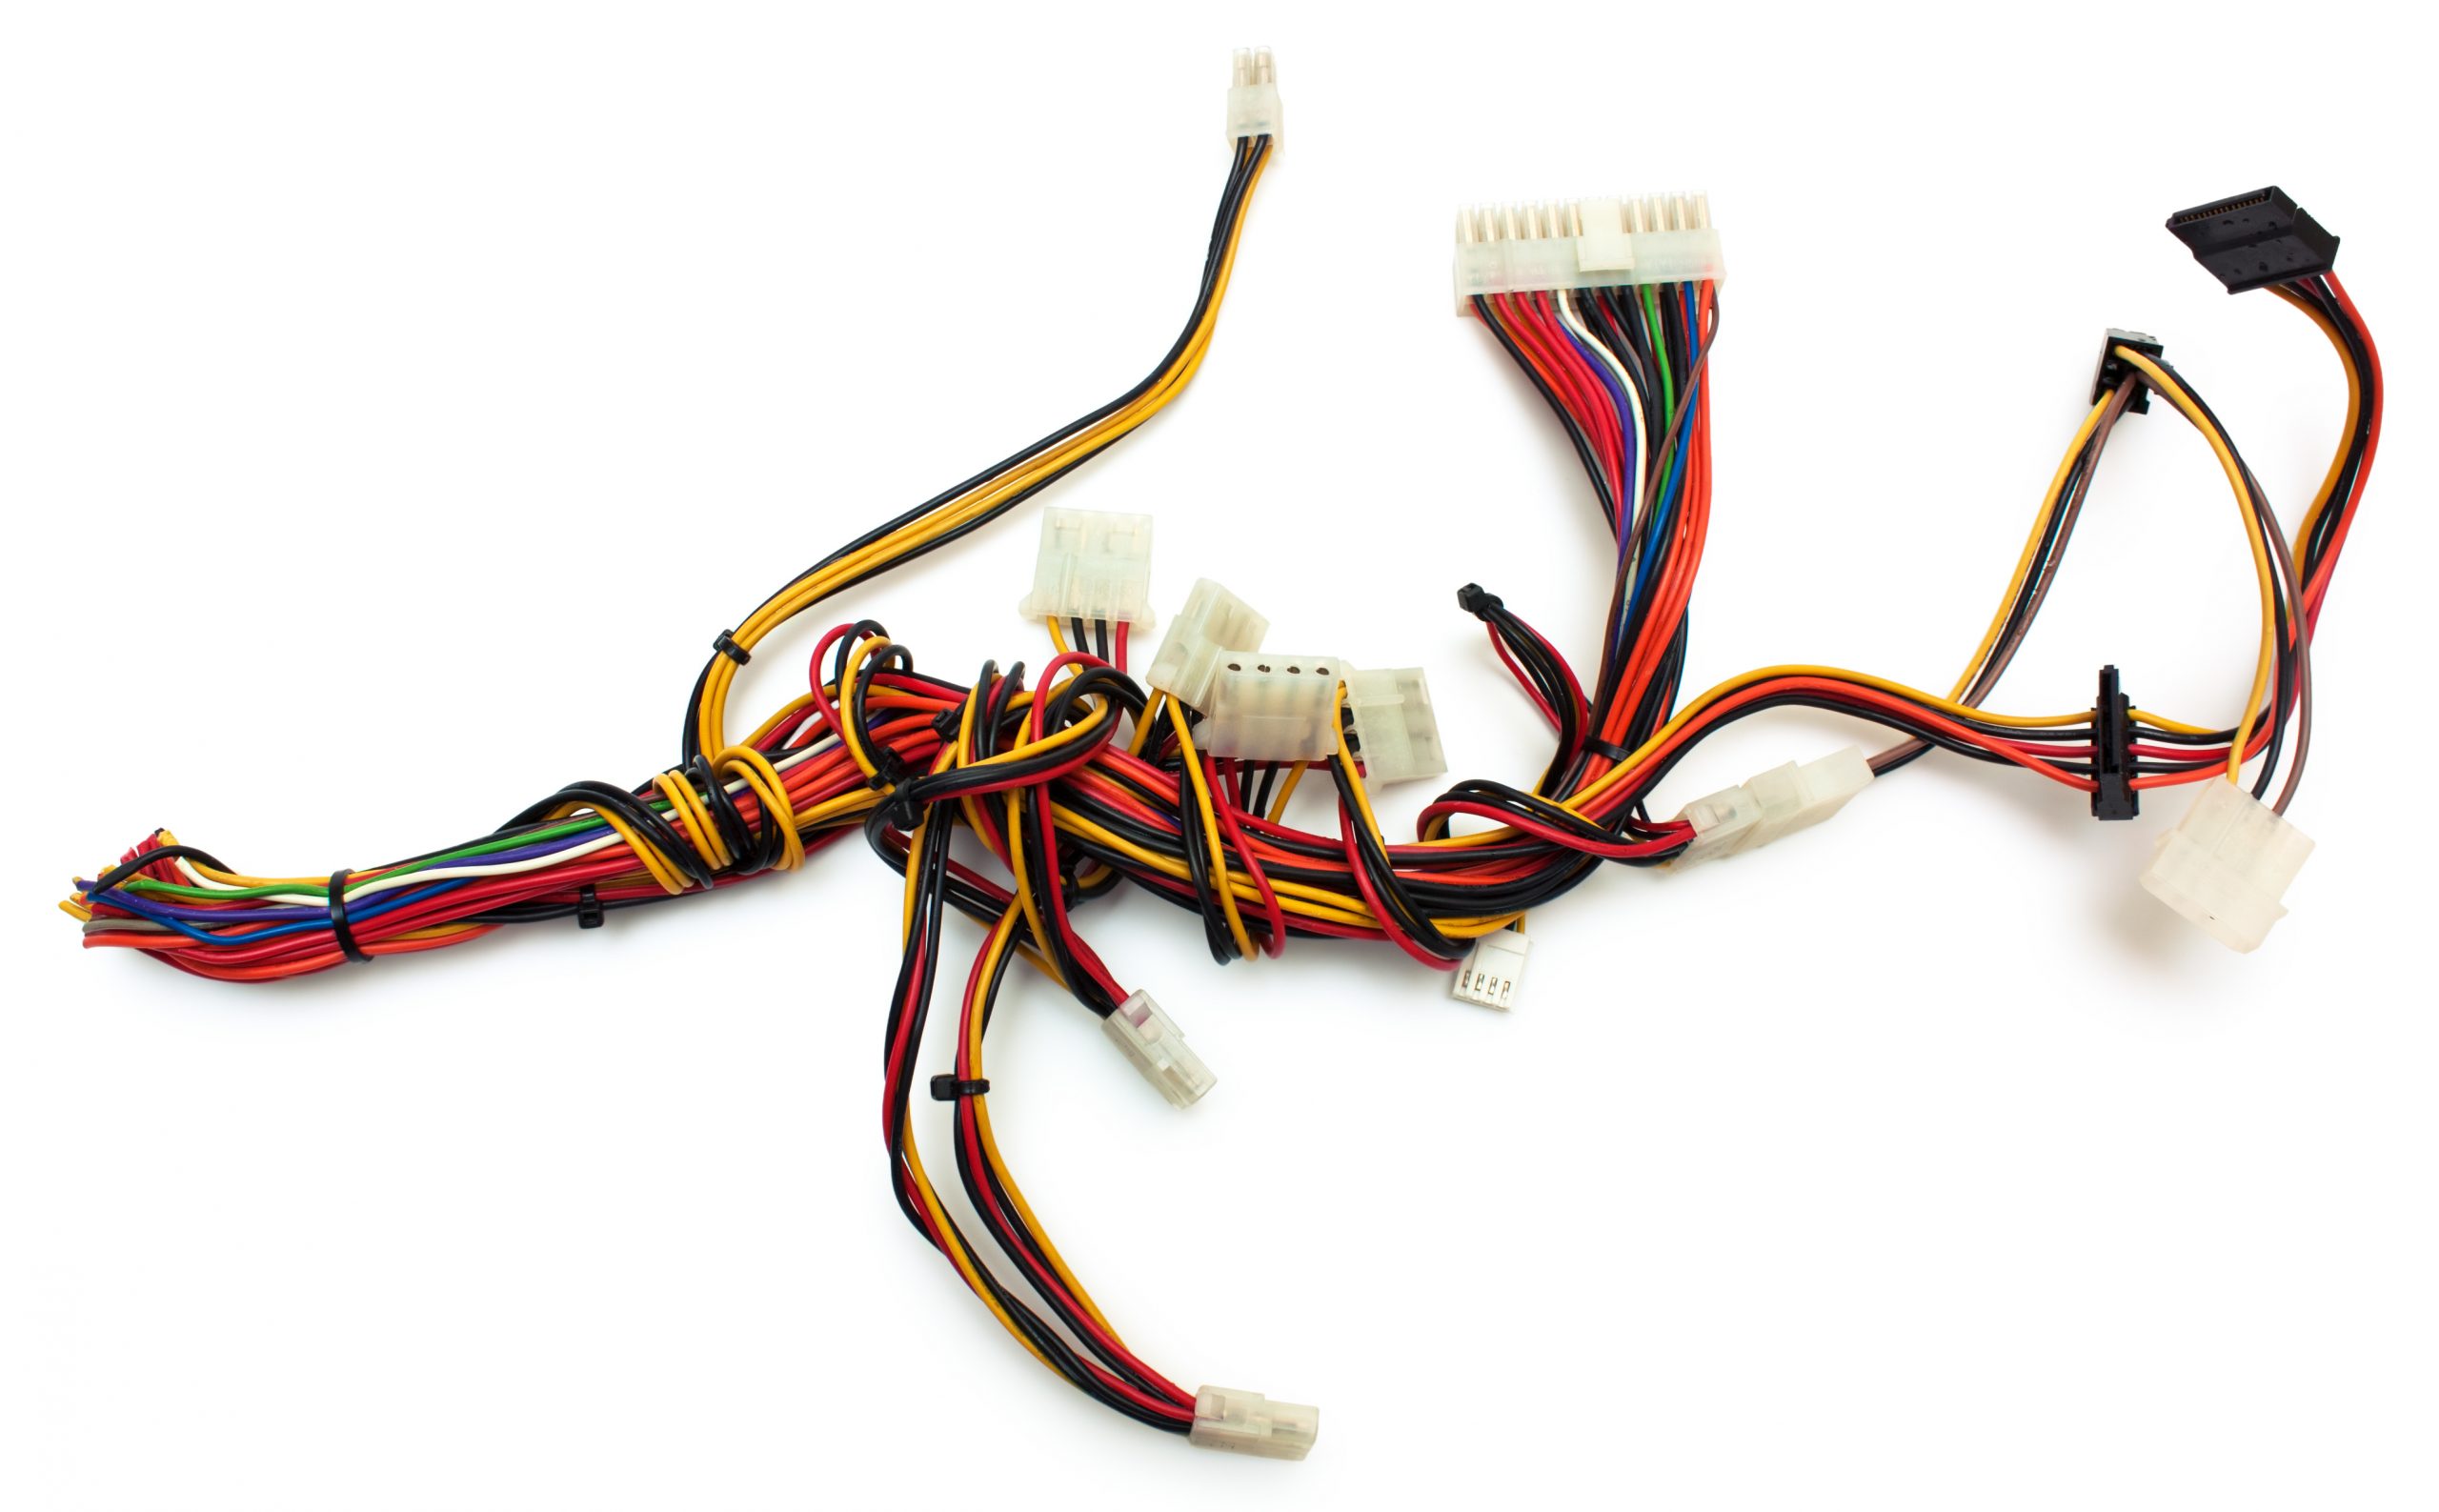 Guide to Wire Harness Design, Development, and Manufacturing